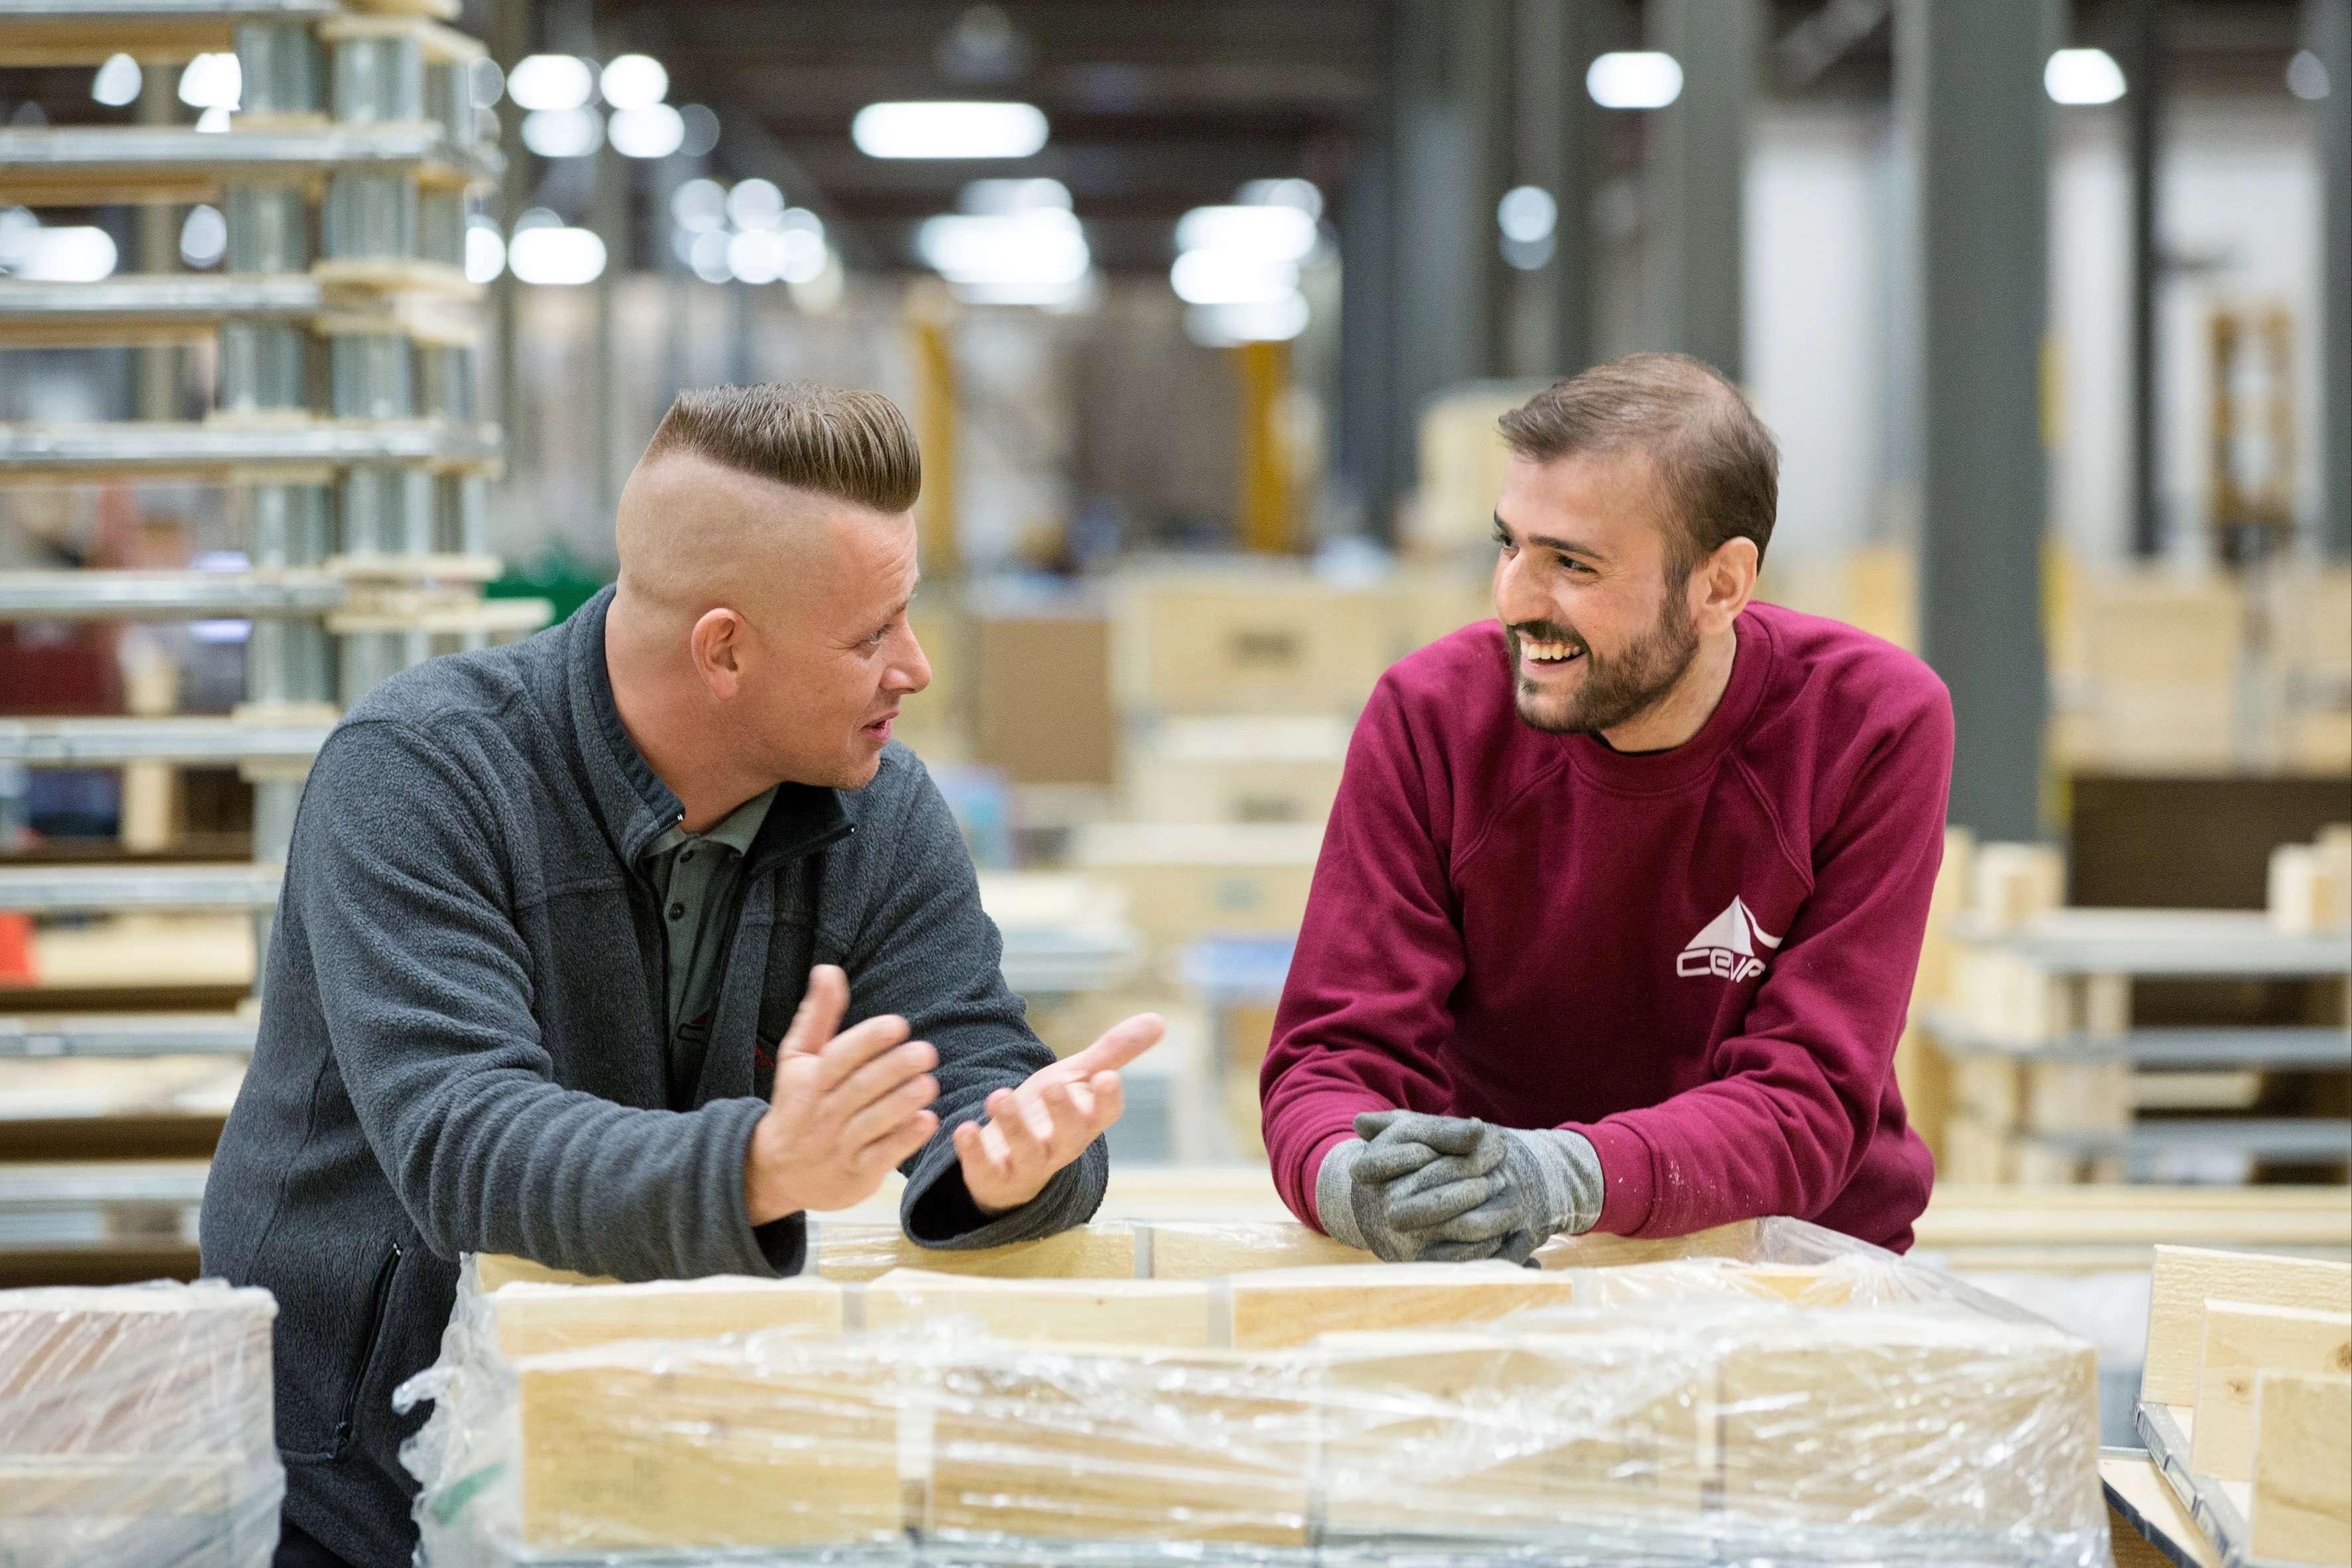 A man is talking to his employer in a warehouse.